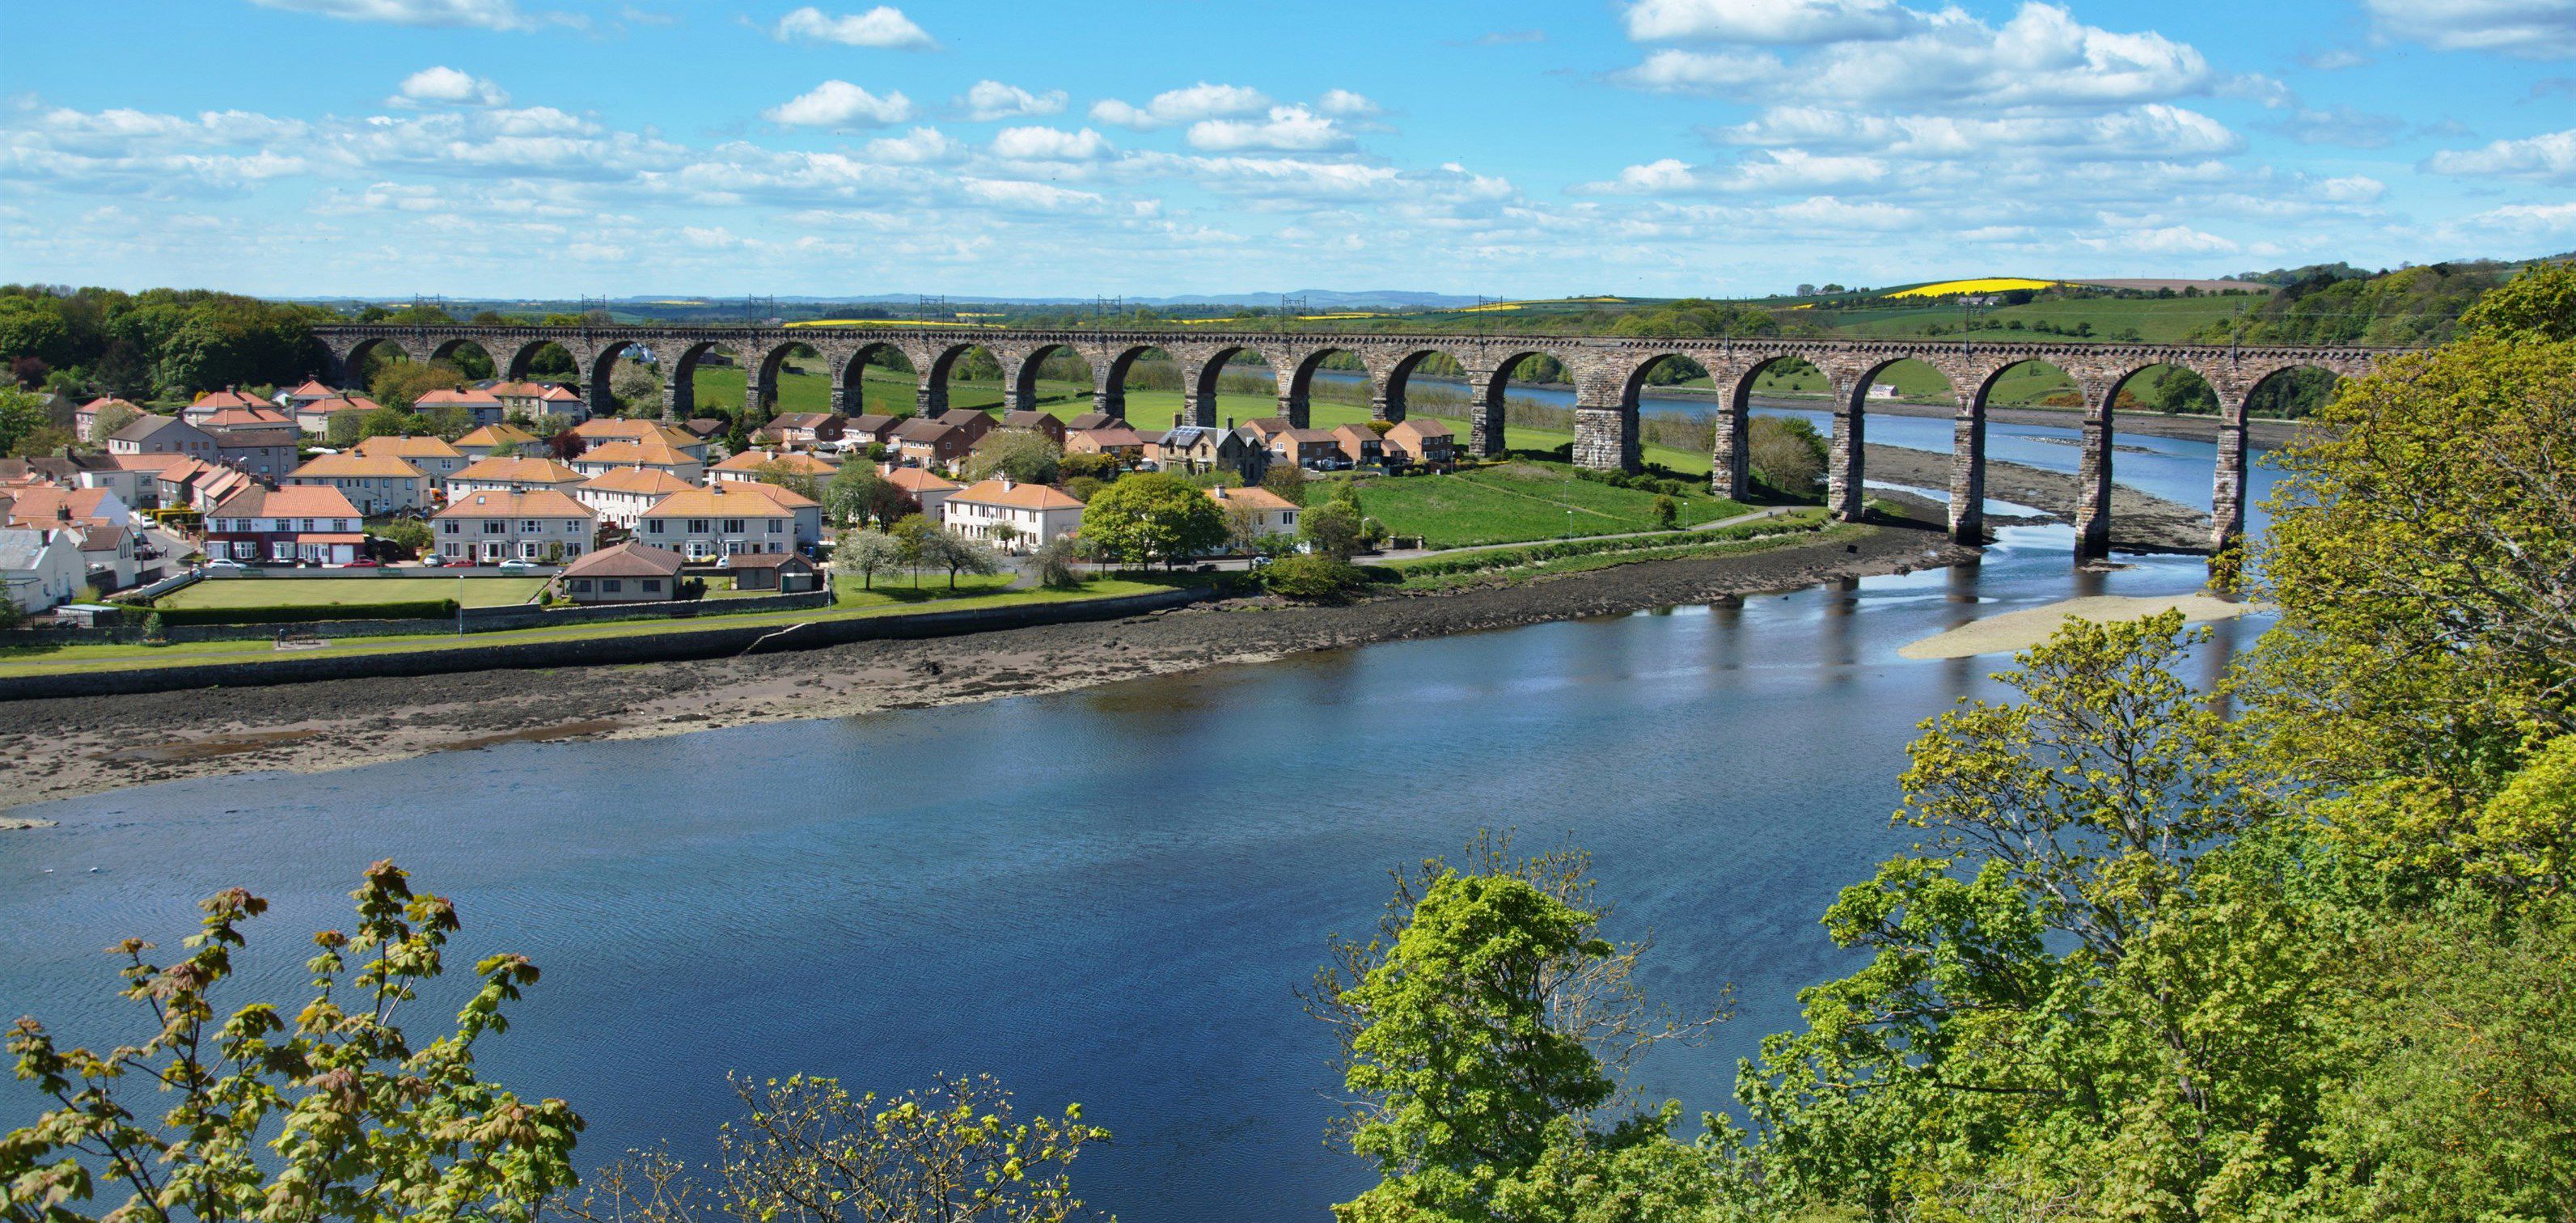 Things to do in Berwick-upon-Tweed